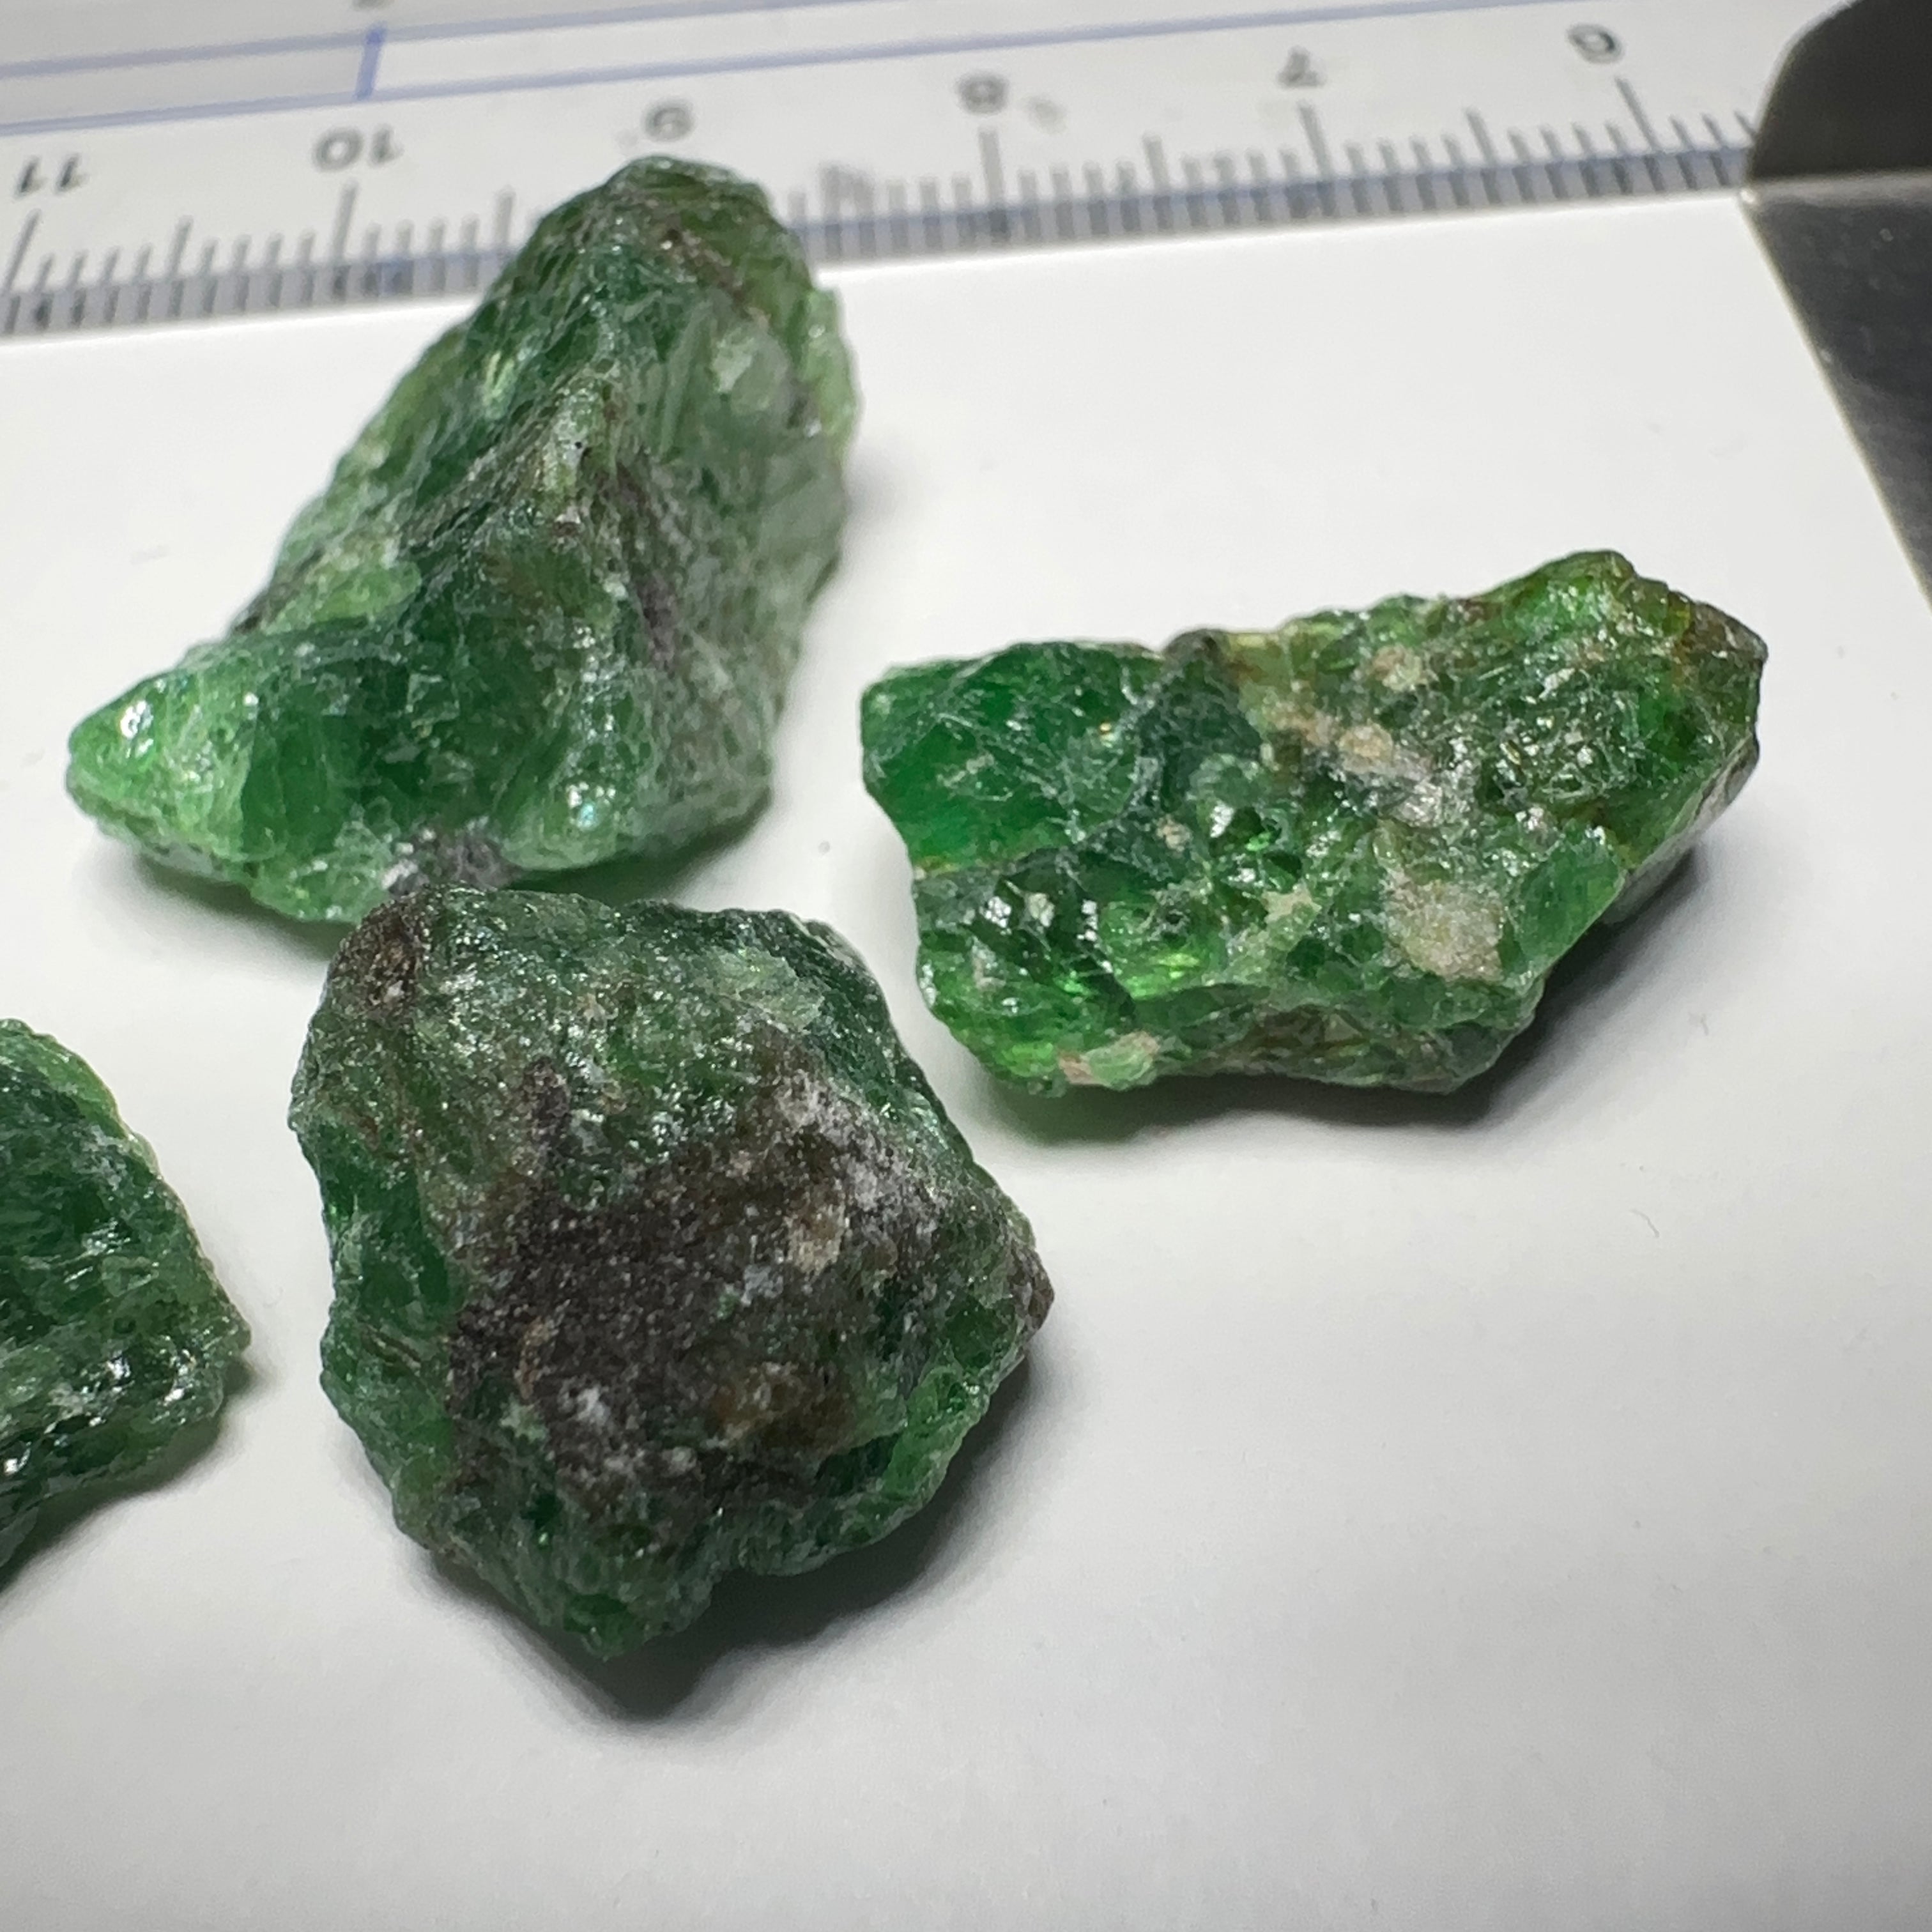 101.98ct Tsavorite Garnet Lot, Tanzania. Untreated Unheated. 11.26ct- 27.87ct. Good as specimens to add to a collection